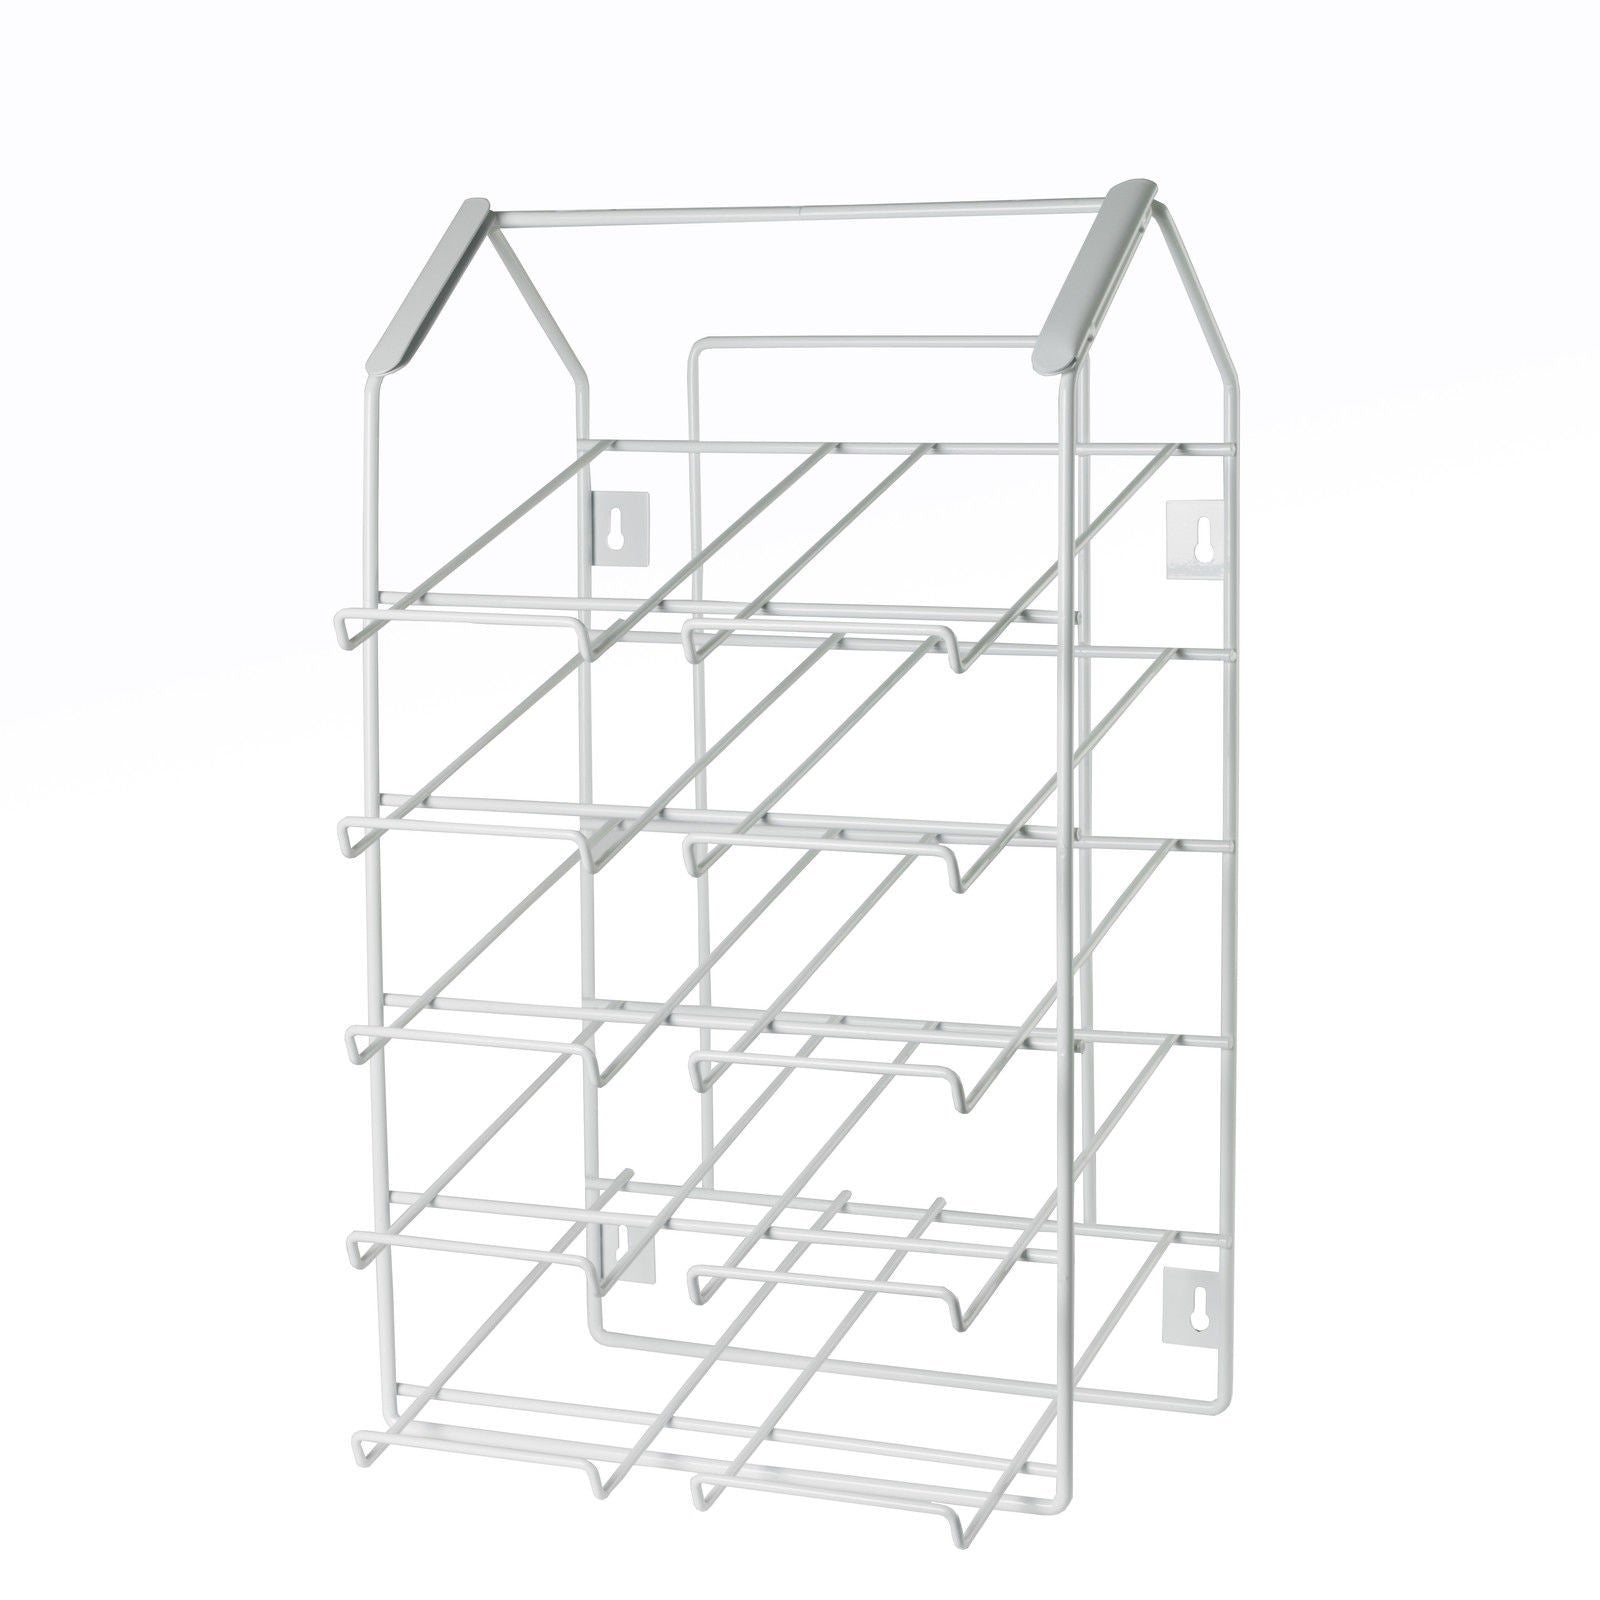 Display Stand for Assorted Boxes - Assorted Boxes - spo-cs-disabled - spo-default - spo-disabled - spo-notify-me-disabl